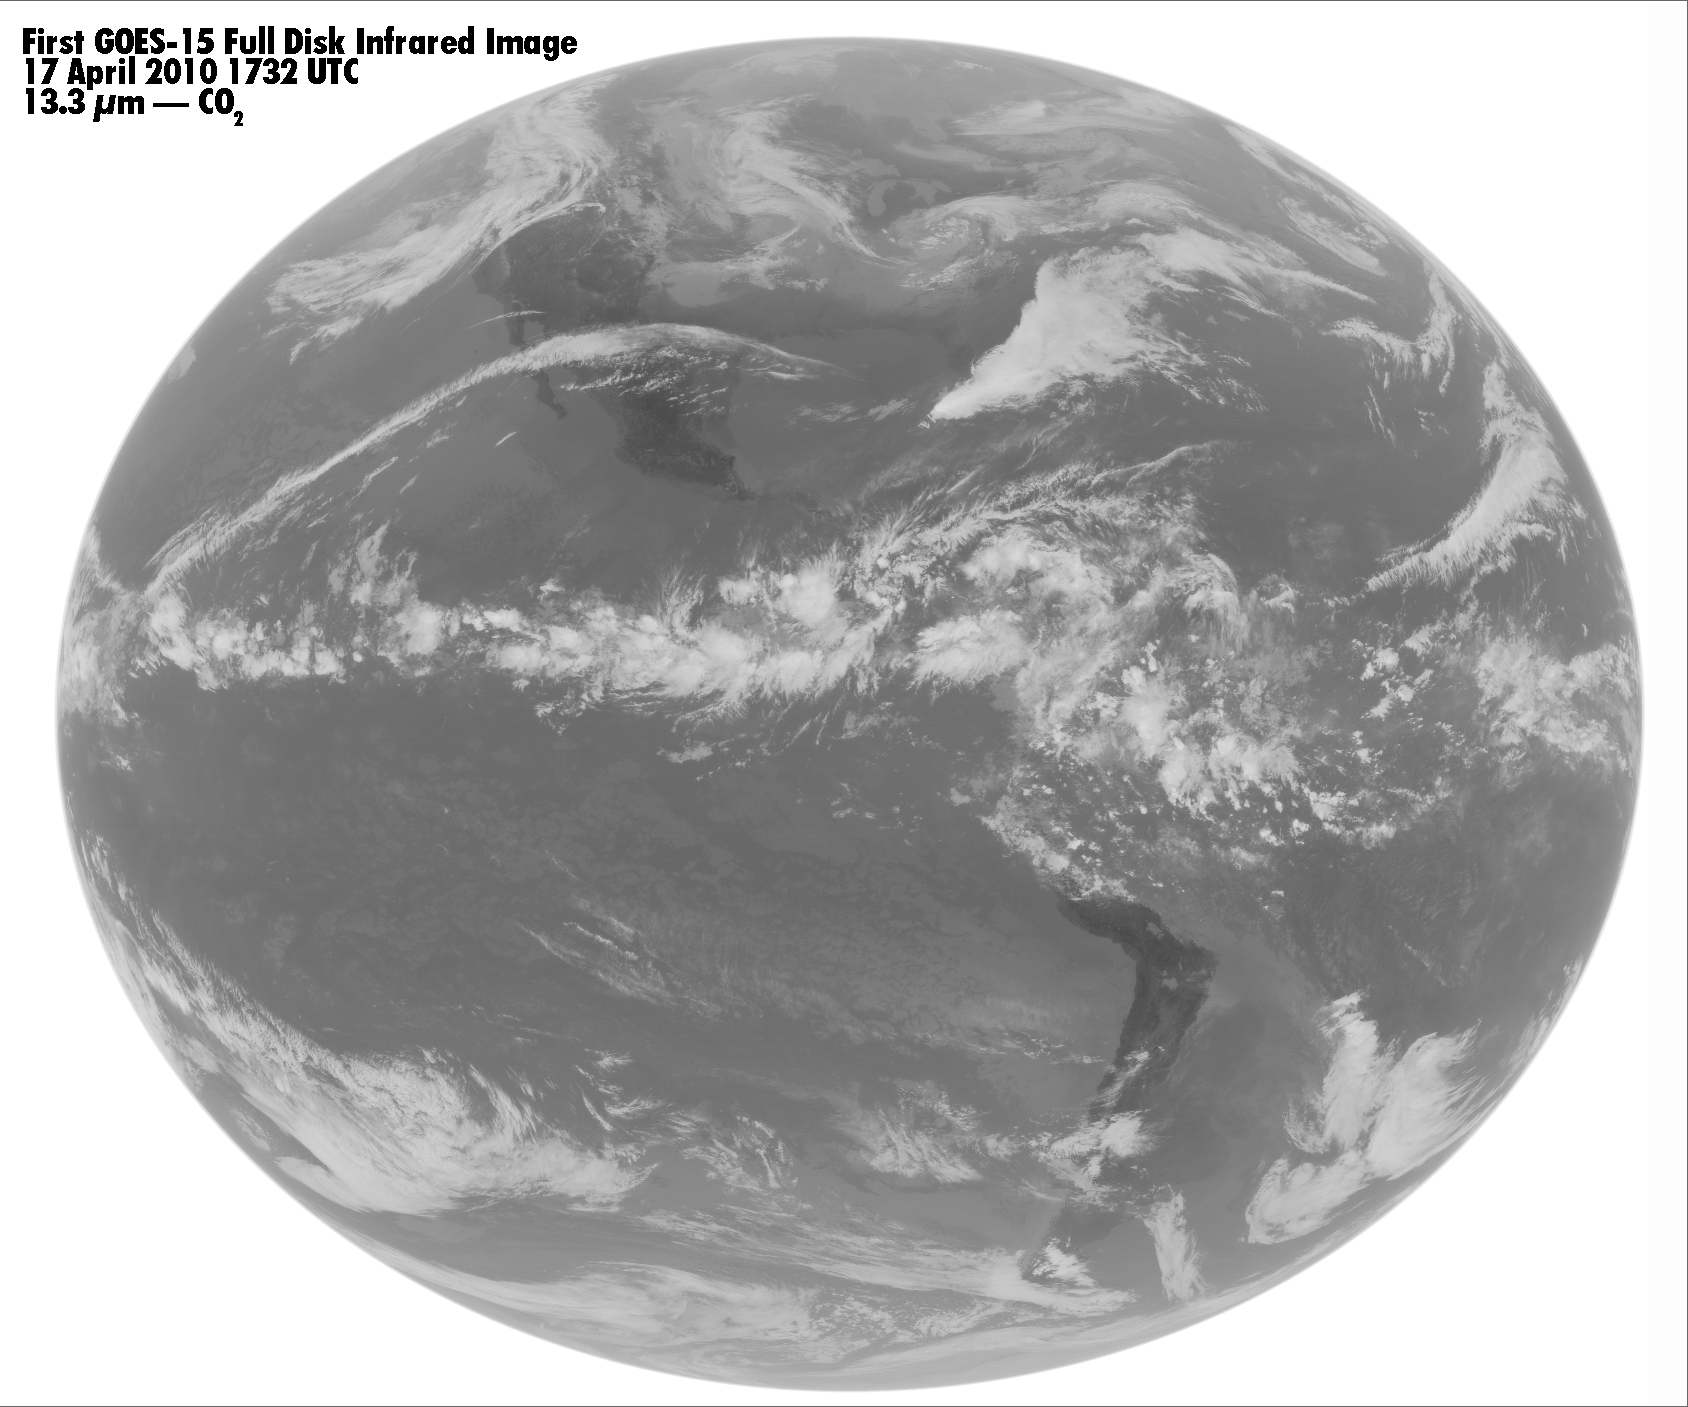 First GOES-15 Full Disk IR Image, 17 April 2010, 1732 UTC; 13.3 µm - CO2